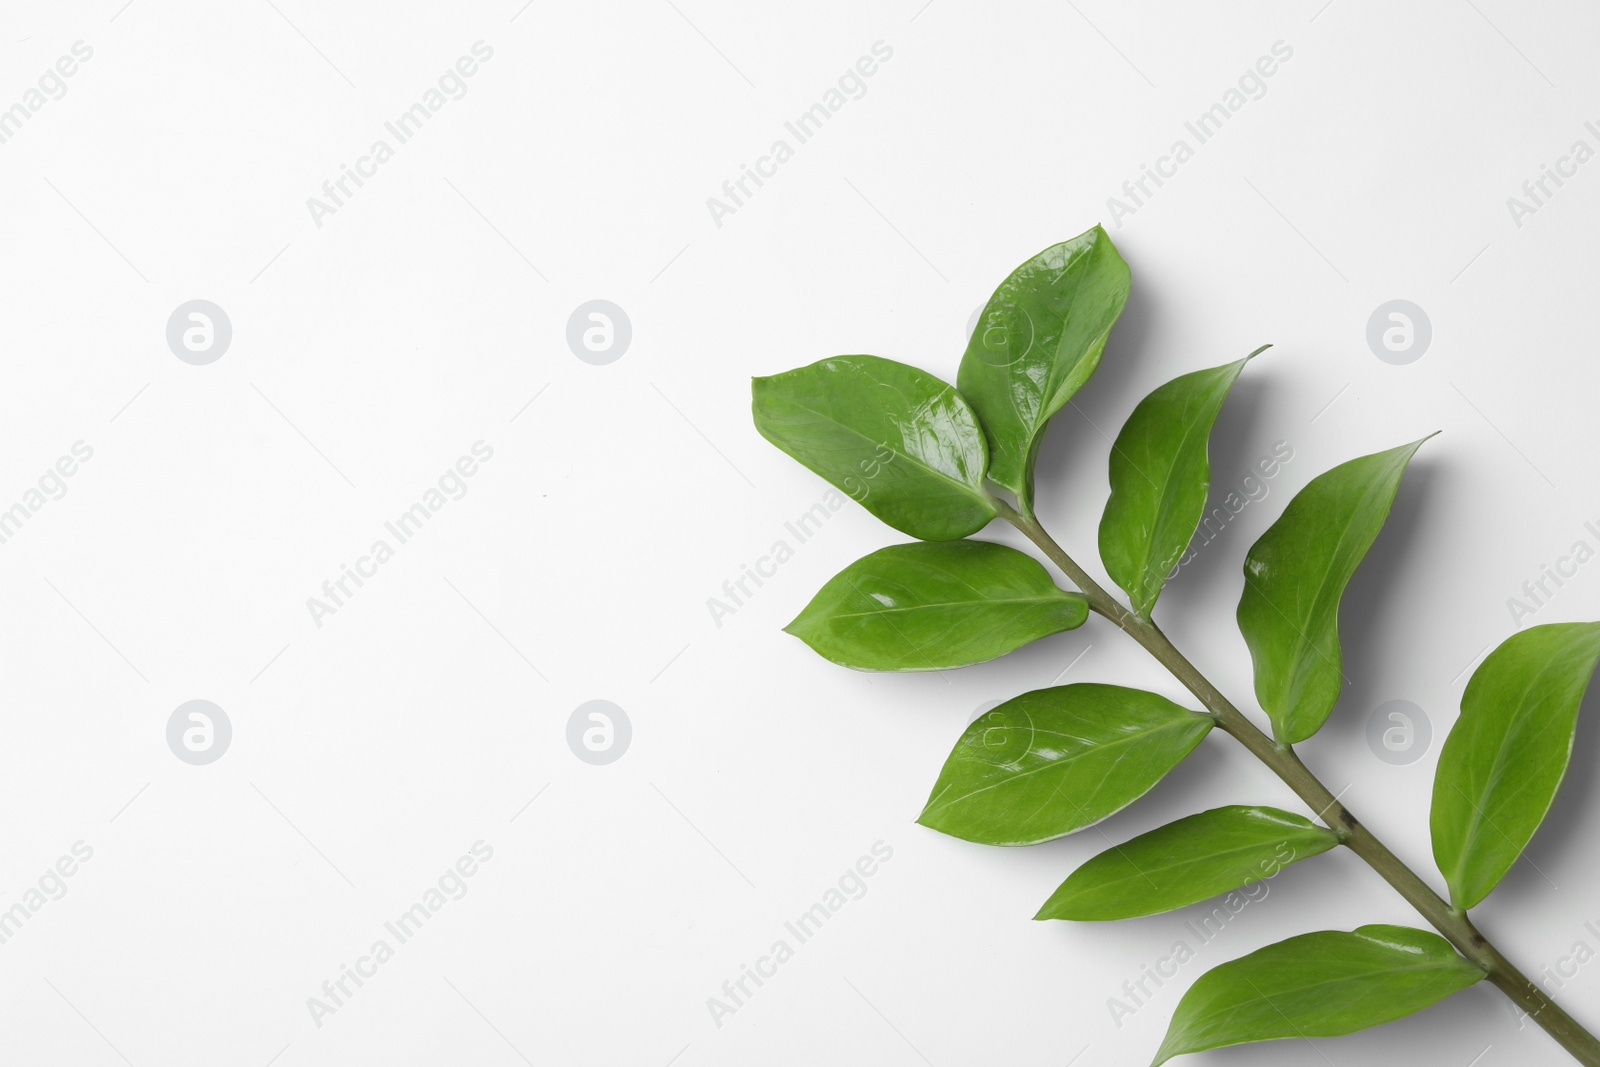 Photo of Tropical zamioculcas plant branch with leaves on white background